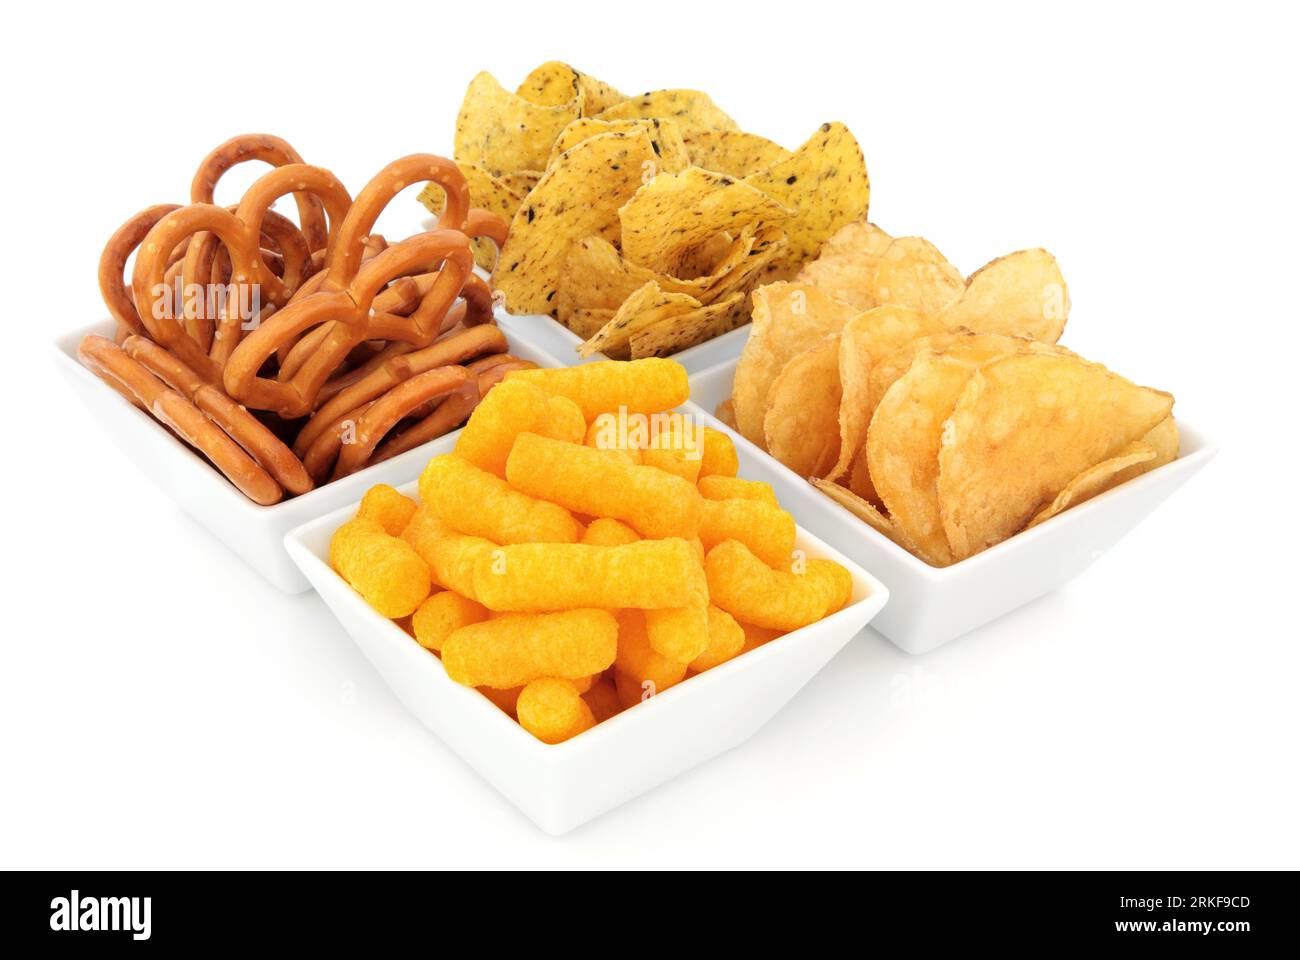 Snacks in a white porcelain dish. Mix of snacks on a white plate isolated on white. Stock Photo